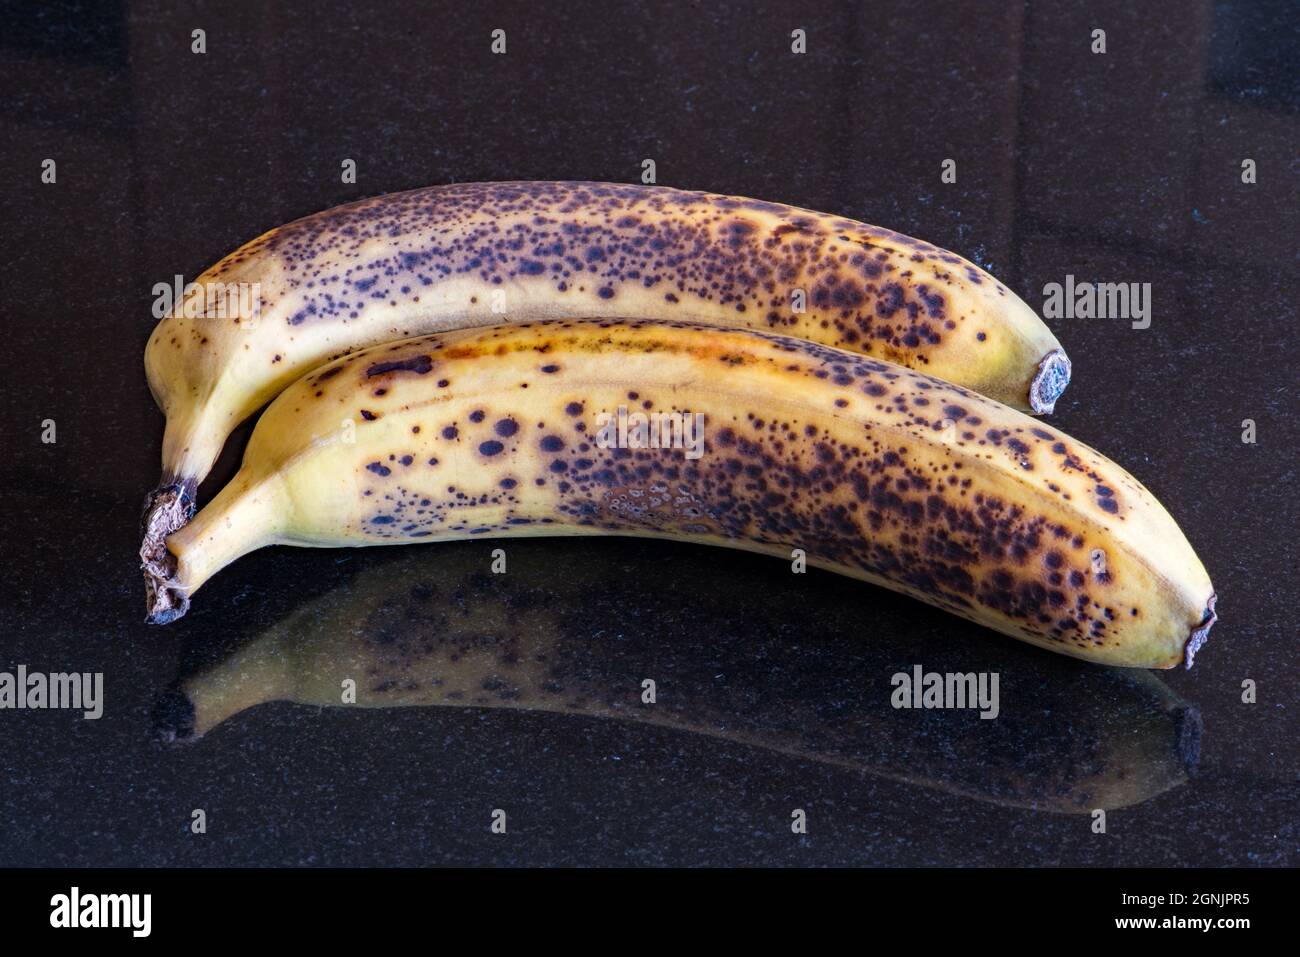 Over-ripe pair pf bananas with dark spotting on the skins Stock Photo